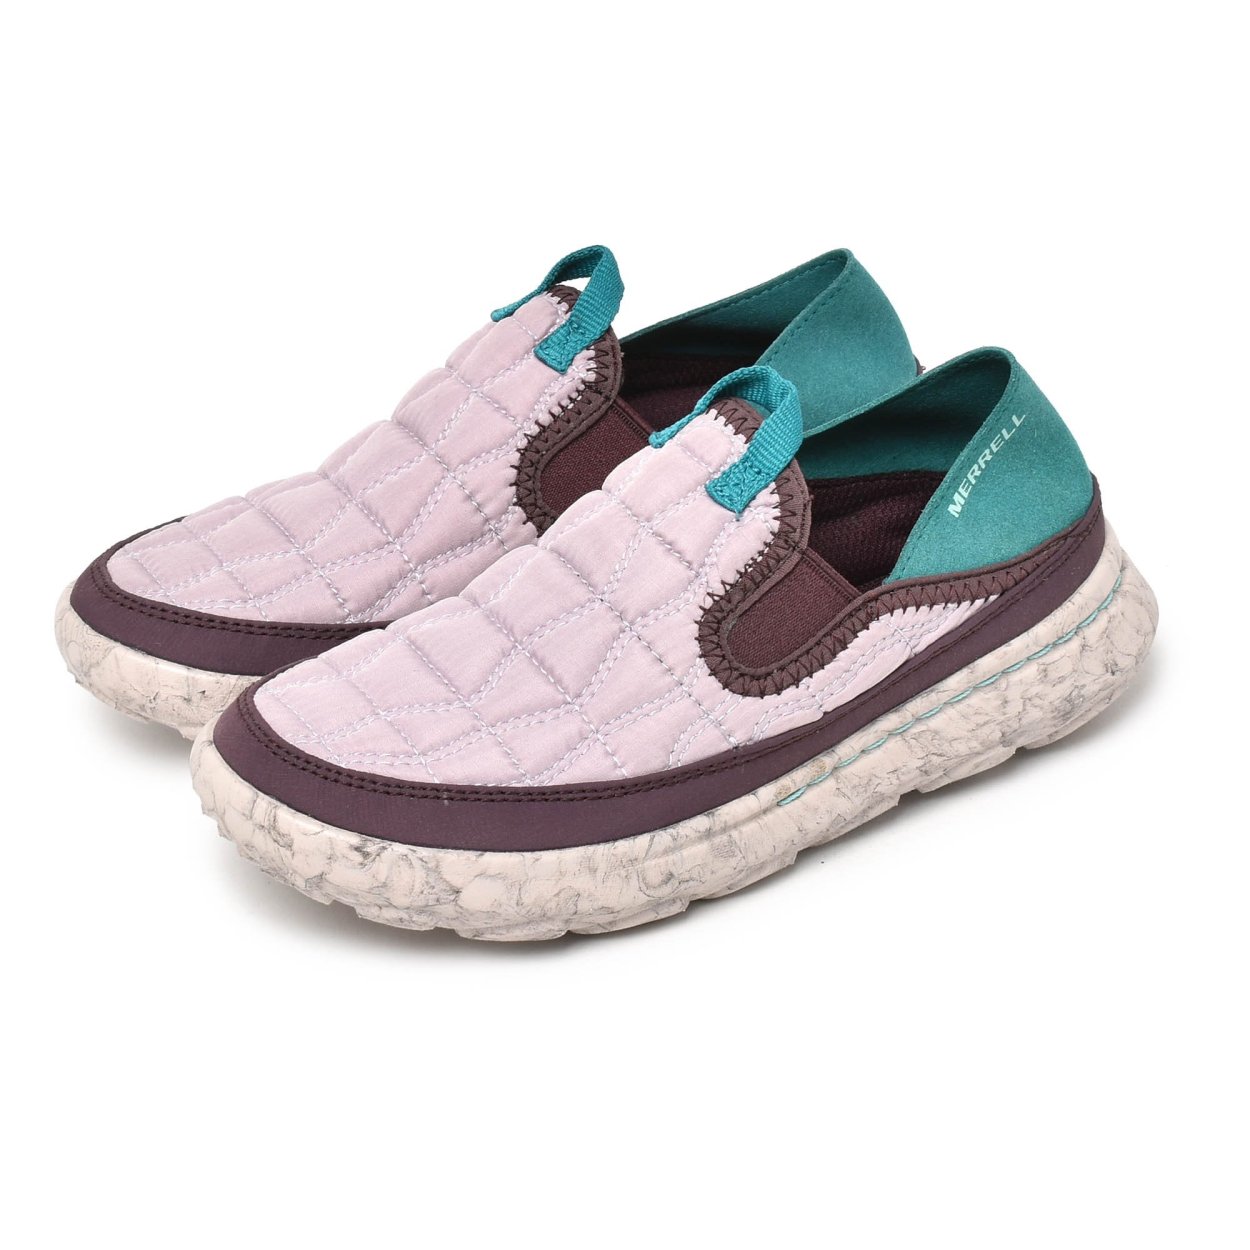 SALE 送料無料 メレル スニーカー キッズ ジュニア 子供 ハット モック 2.0 MERRELL 265924 265925 265926 165927 カーキ 黒｜z-craft｜05